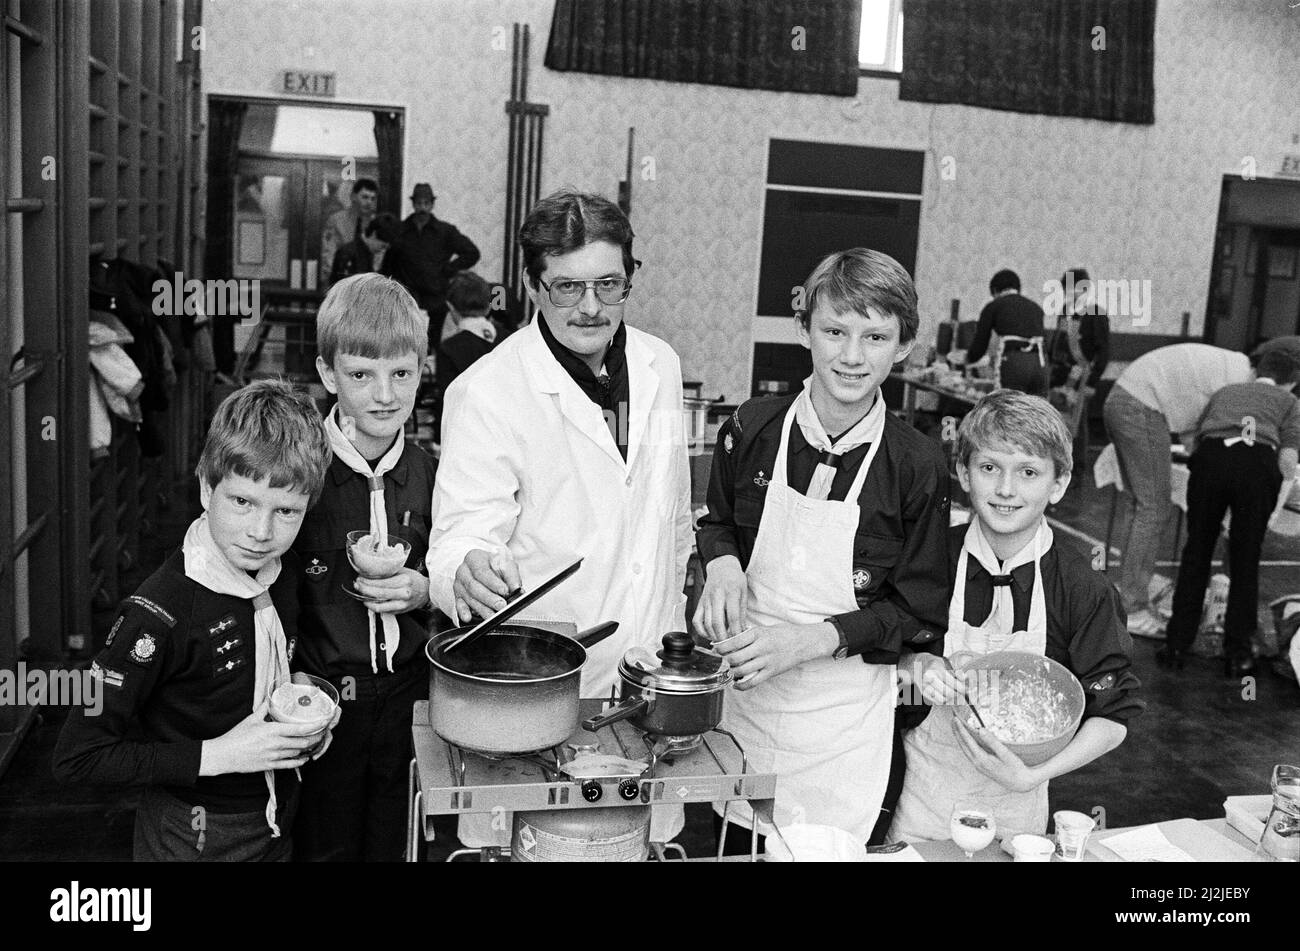 Holme Valley Scouts have held their annual indoor cooking competition. Judge Mr Martyn Leach is seen checking the efforts of brothers Marcus and Robert Wilson and Nicholas and Jonathan Turner. Twenty teams of two competed for the Richard Leach Memorial Trophy. Richard was in the 6th Holme Valley scouts when he died in 1973, aged 15. Like his brother Martyn - a former chef who now runs a fish and game shop - he was keen on catering. 21st February 1987. Stock Photo